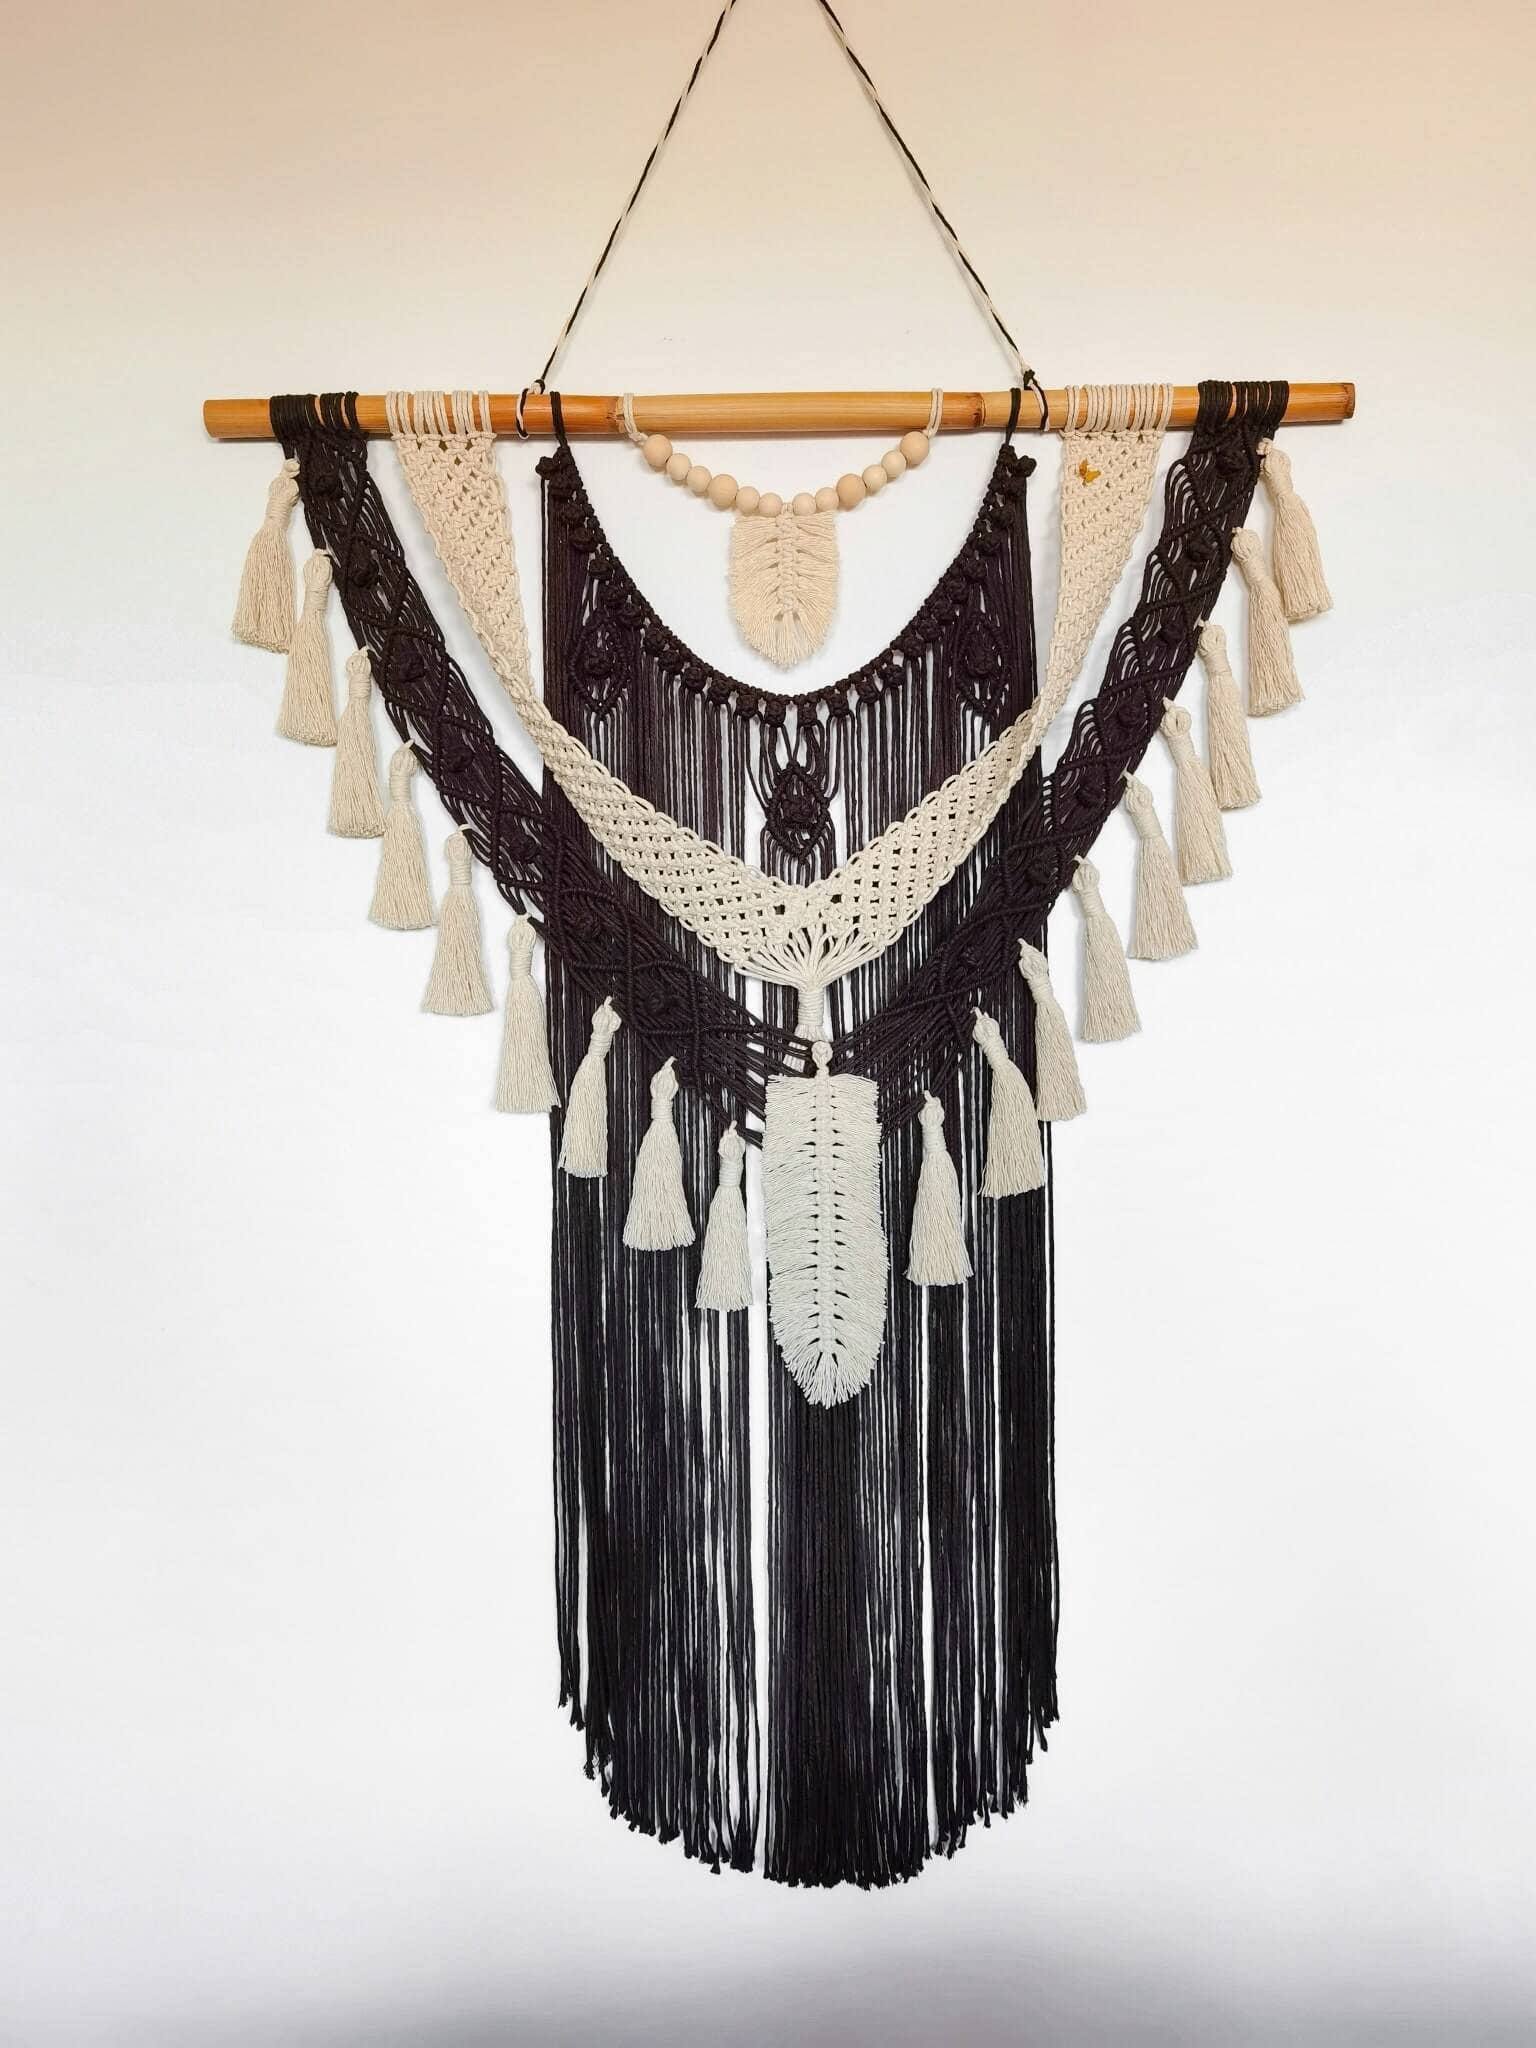 Macrame wall hanging with feathers and tassels